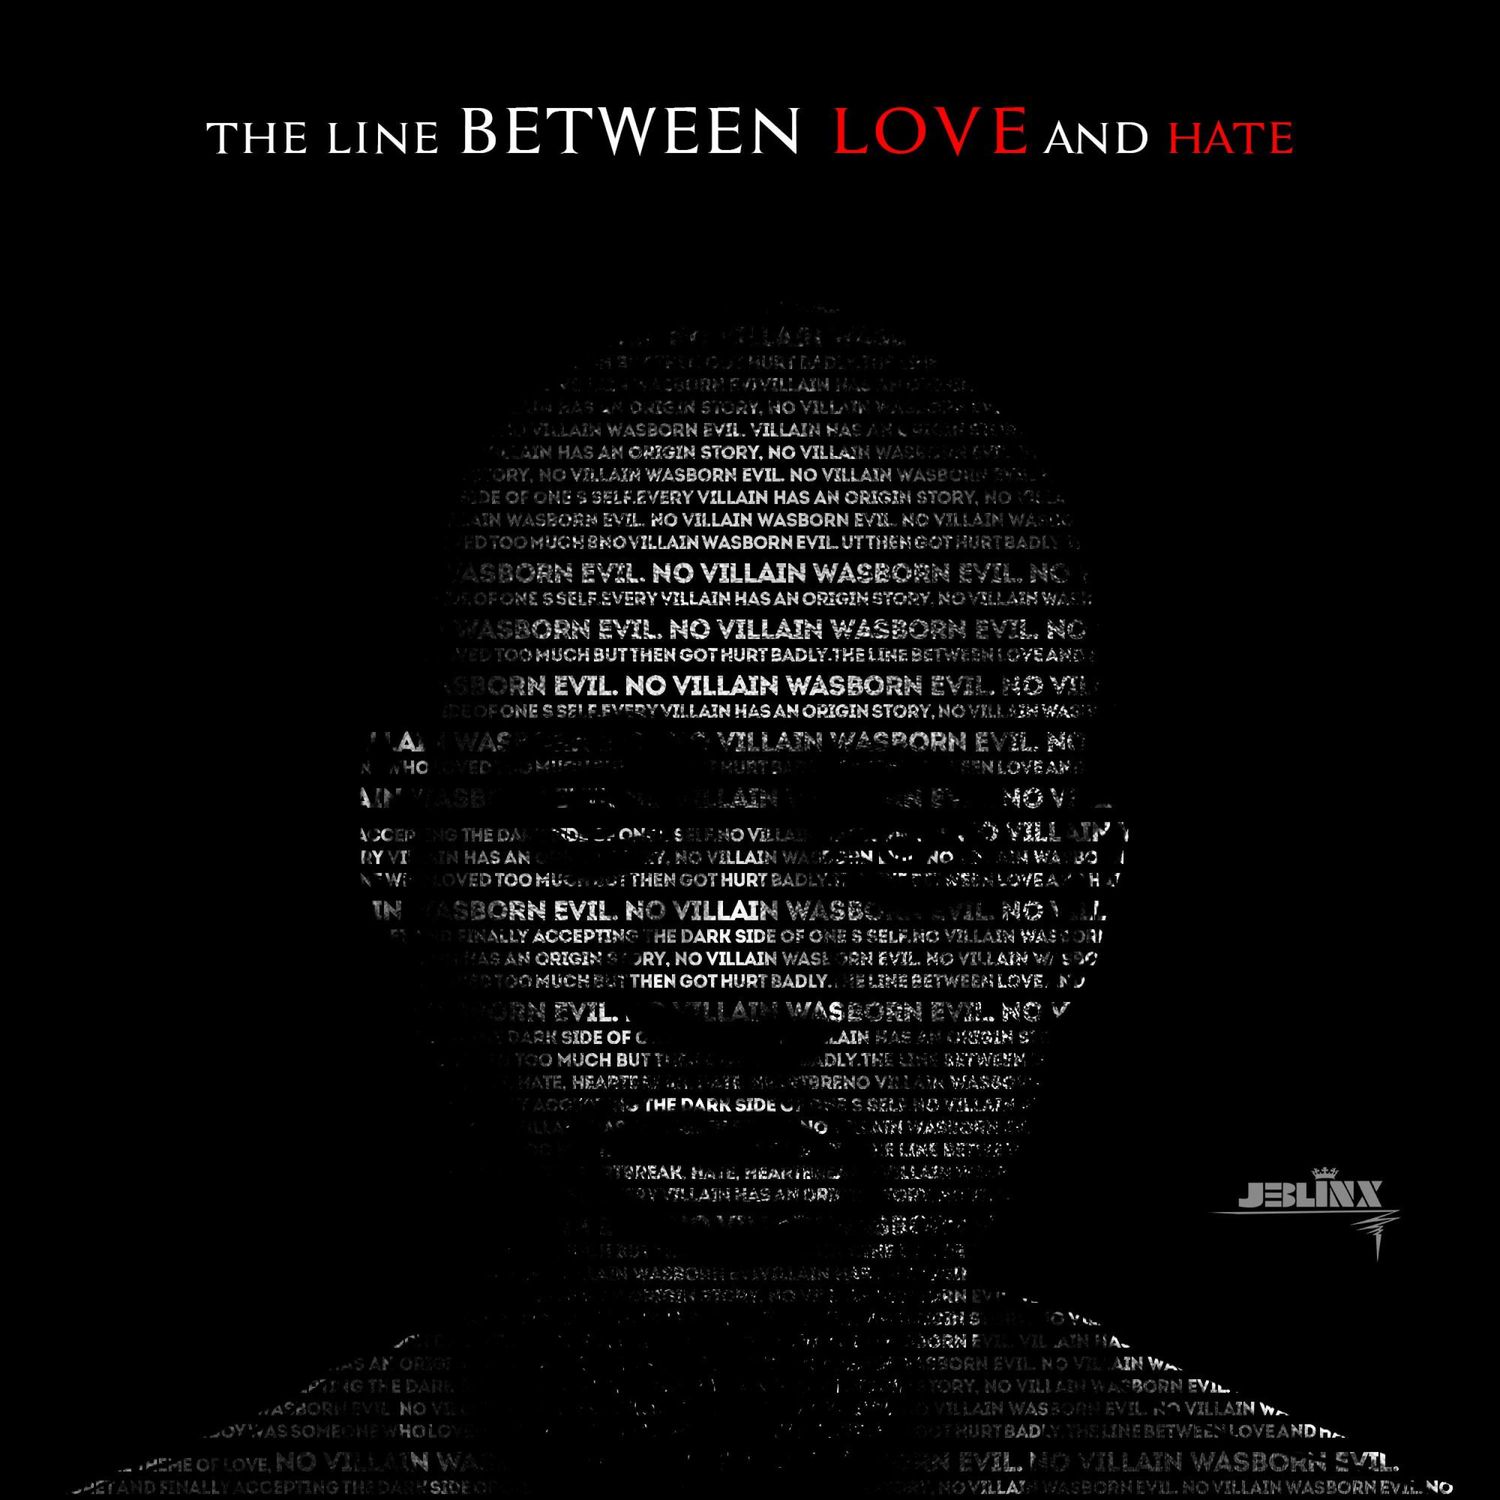 Jeblinx - The Lines Between Love And Hate EP Download